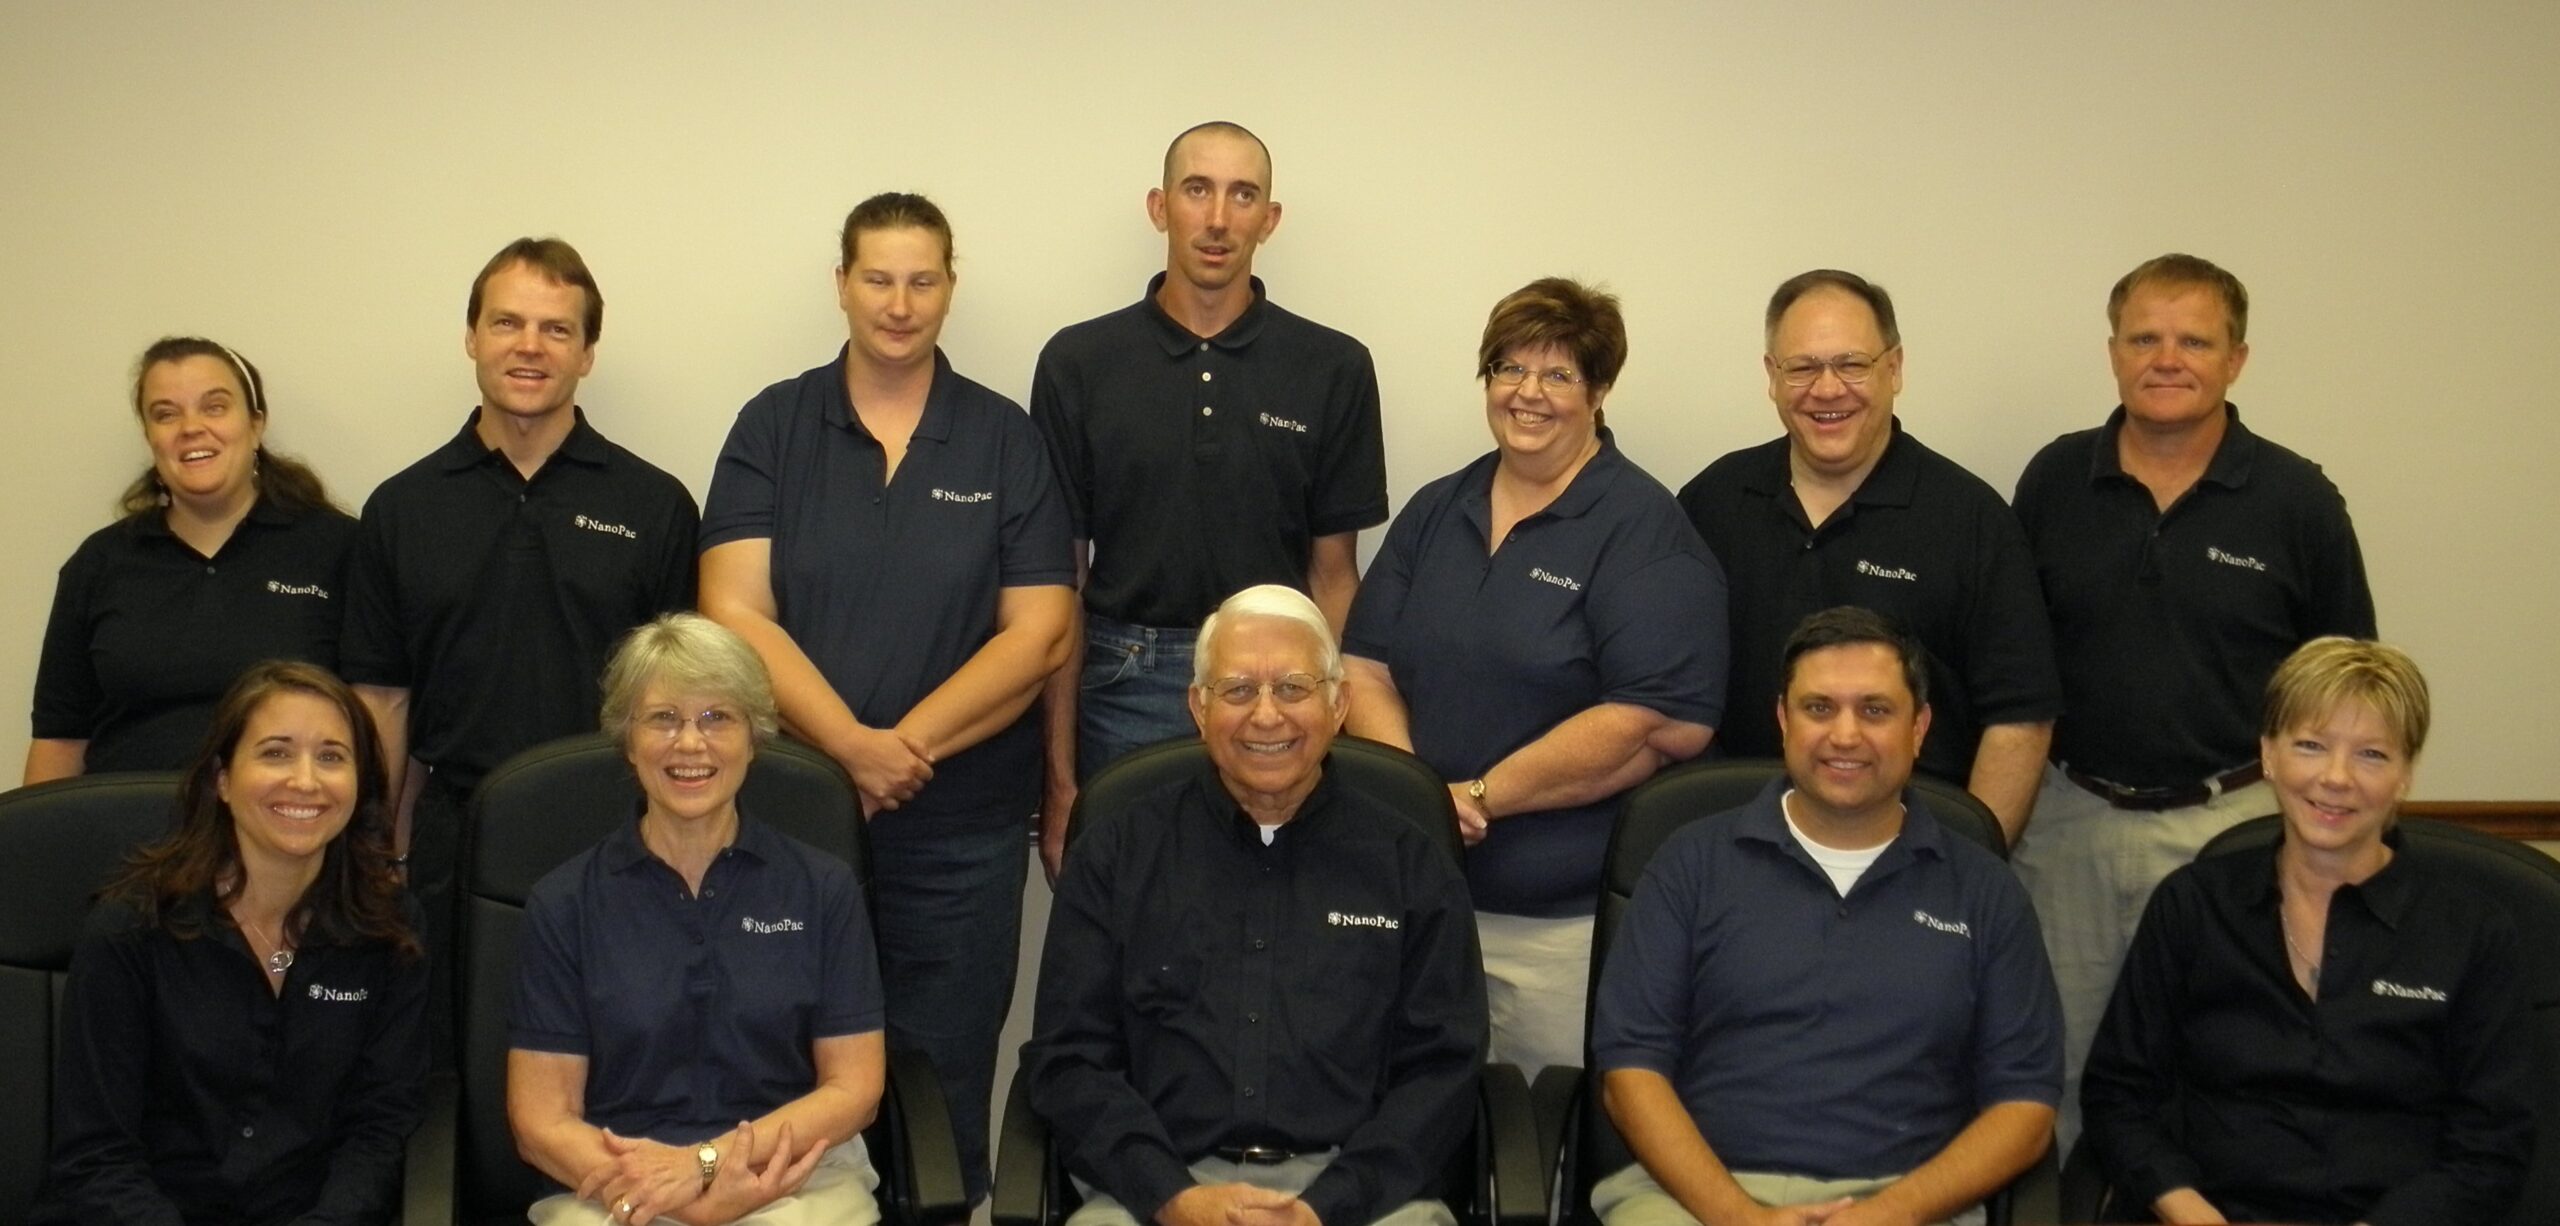 NanoPac Group Photo From October 2011 - From left to right Dawn, Dave, Chris, Rick, Maria, Margie, Silvio, Vince, and Jana